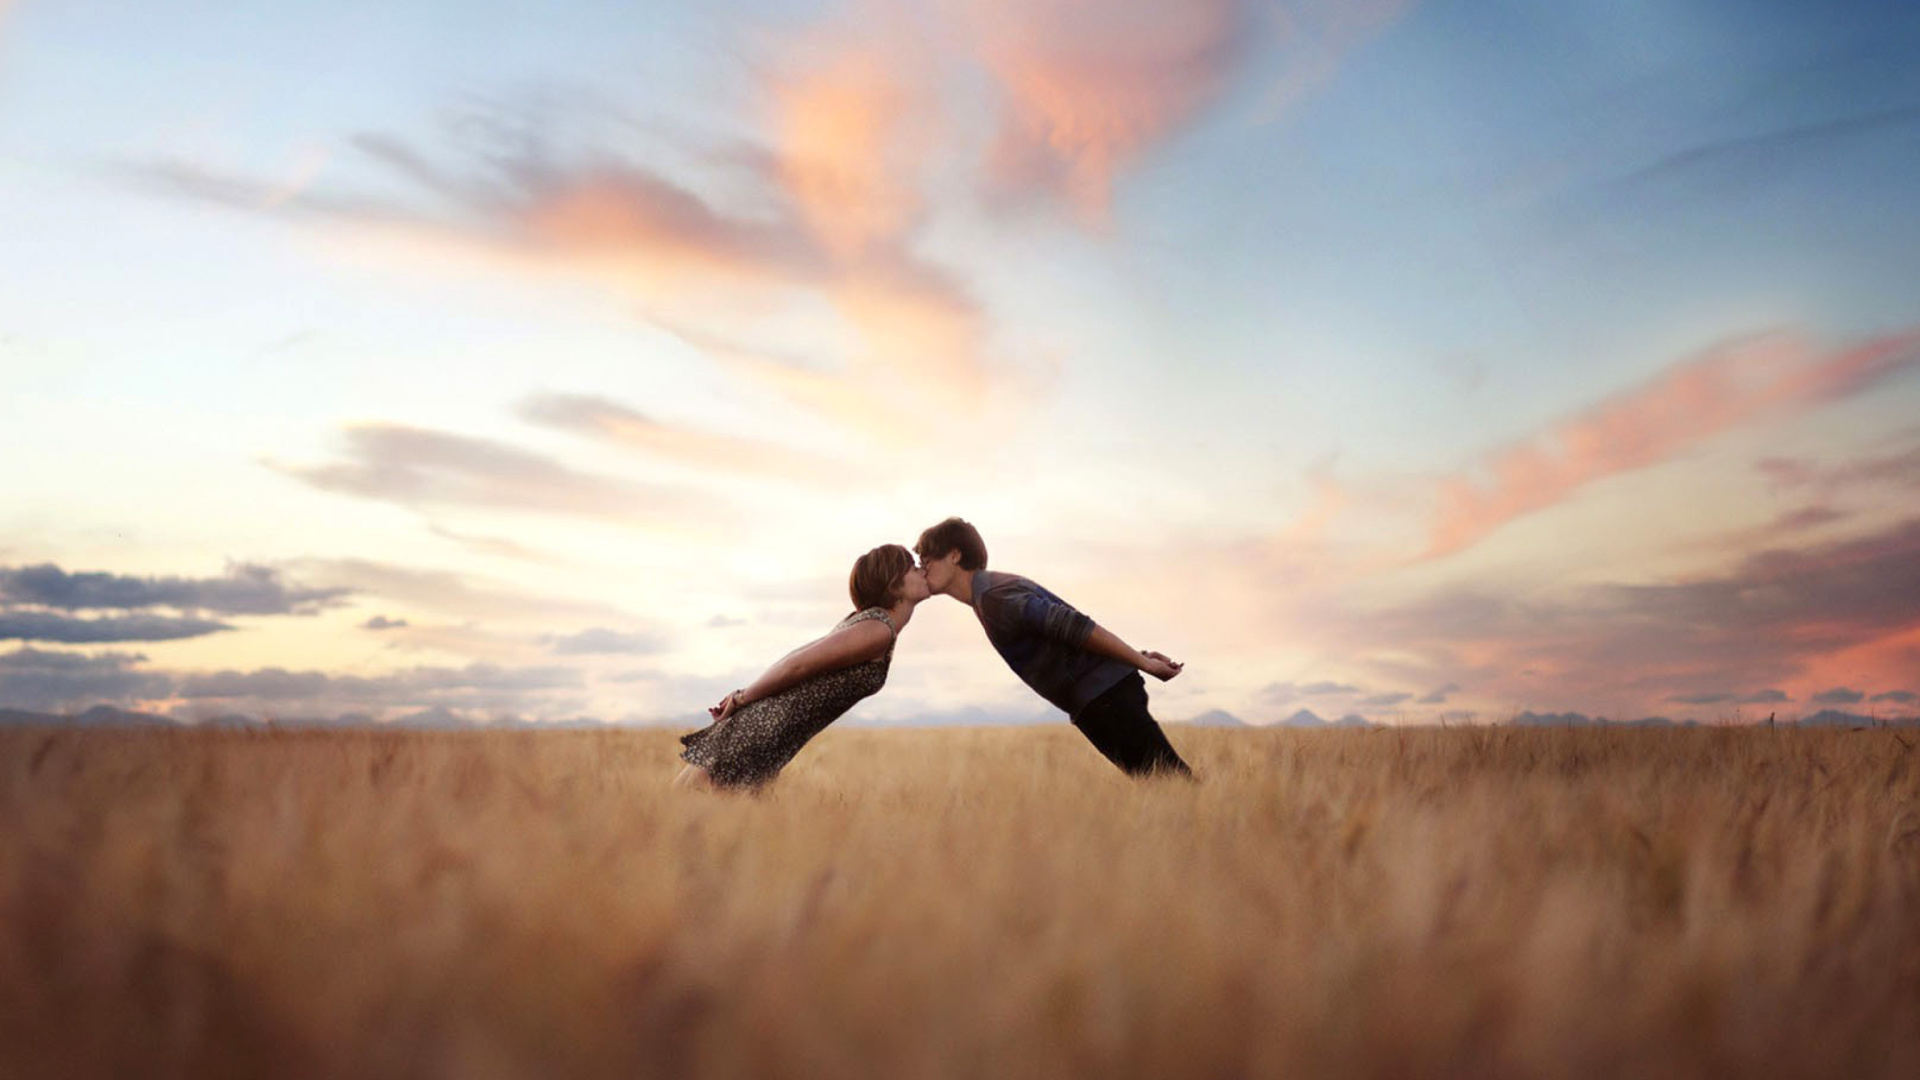 kiss wallpaper full hd,people in nature,sky,happy,tricking,ecoregion